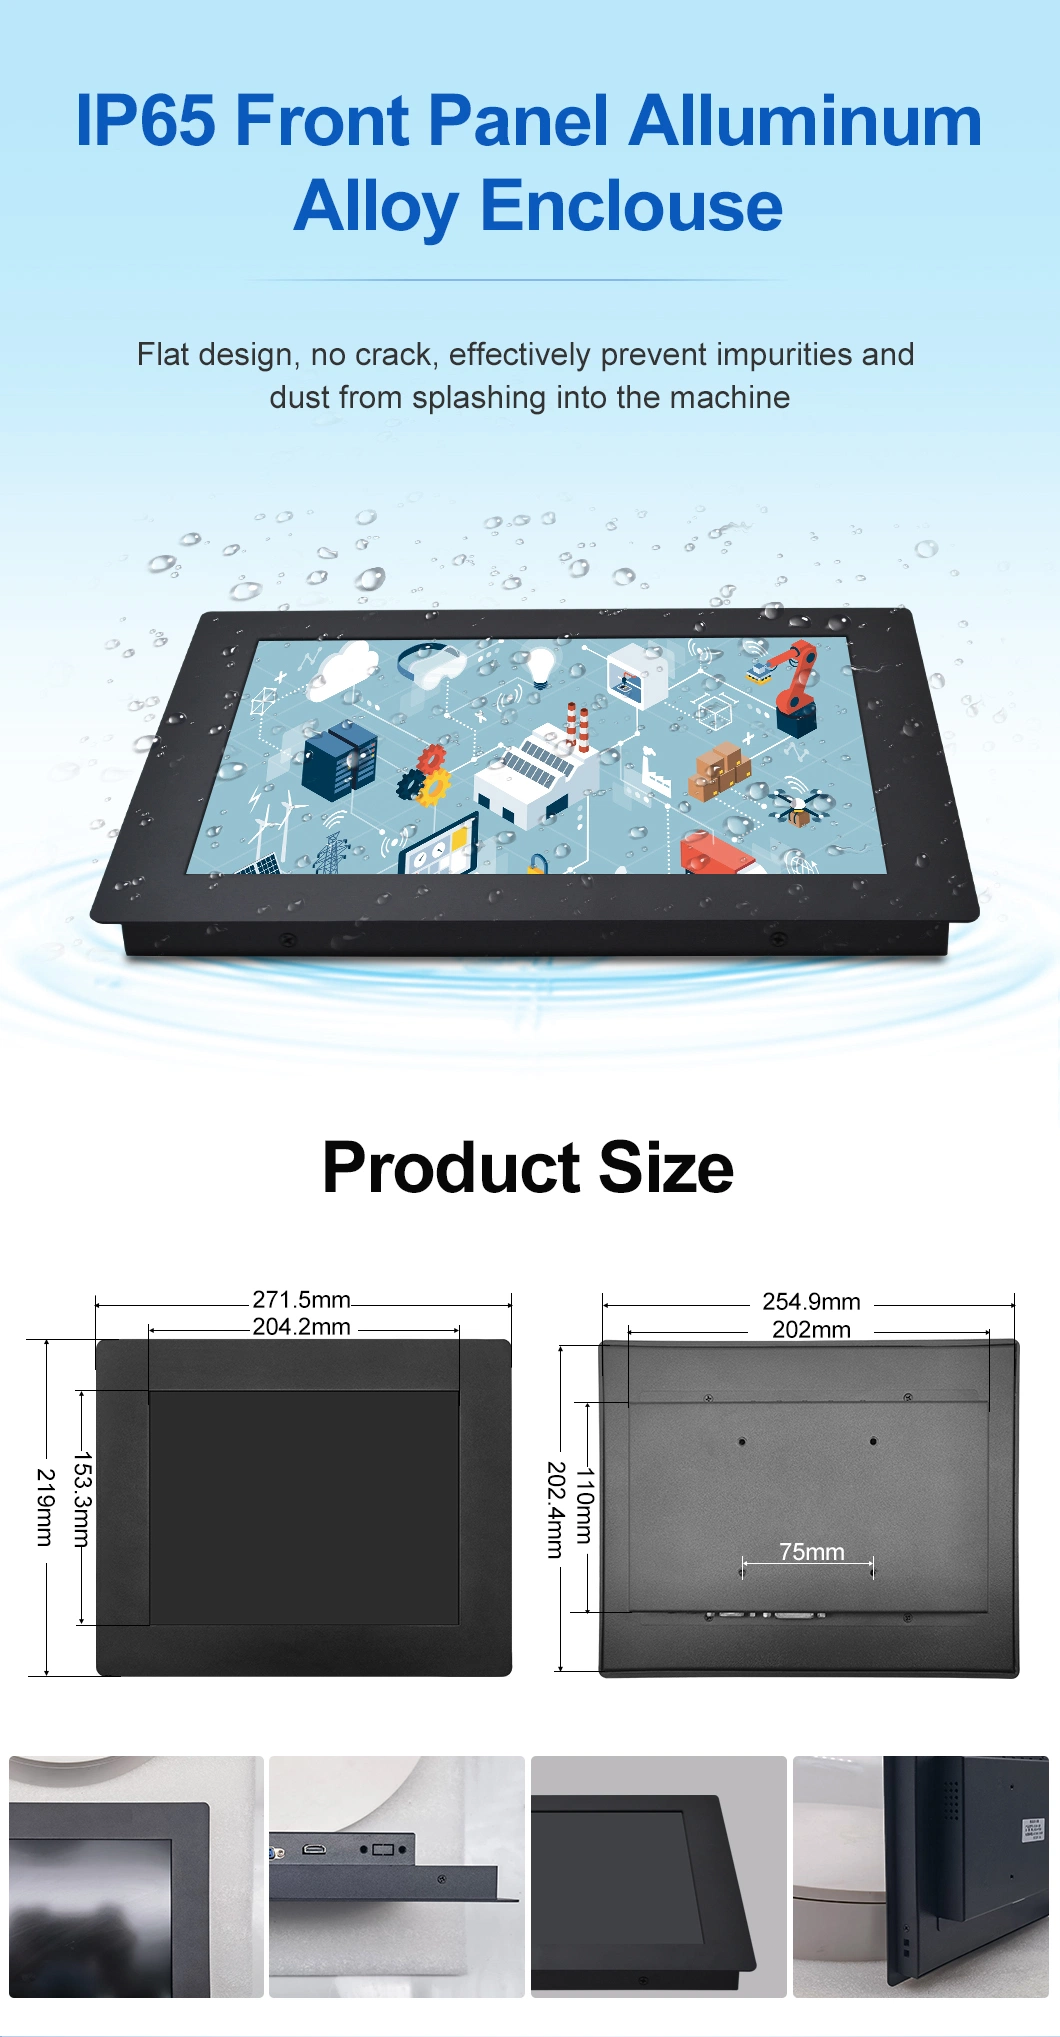 7 8 9 10&quot; 12&quot; 15&quot; 17&quot; 19&prime;&prime; Inch 800*600 HD-Mi VGA DVI Resistive Square Touch Screen Metal Case TFT Embedded OEM ODM Industrial LCD Monitor